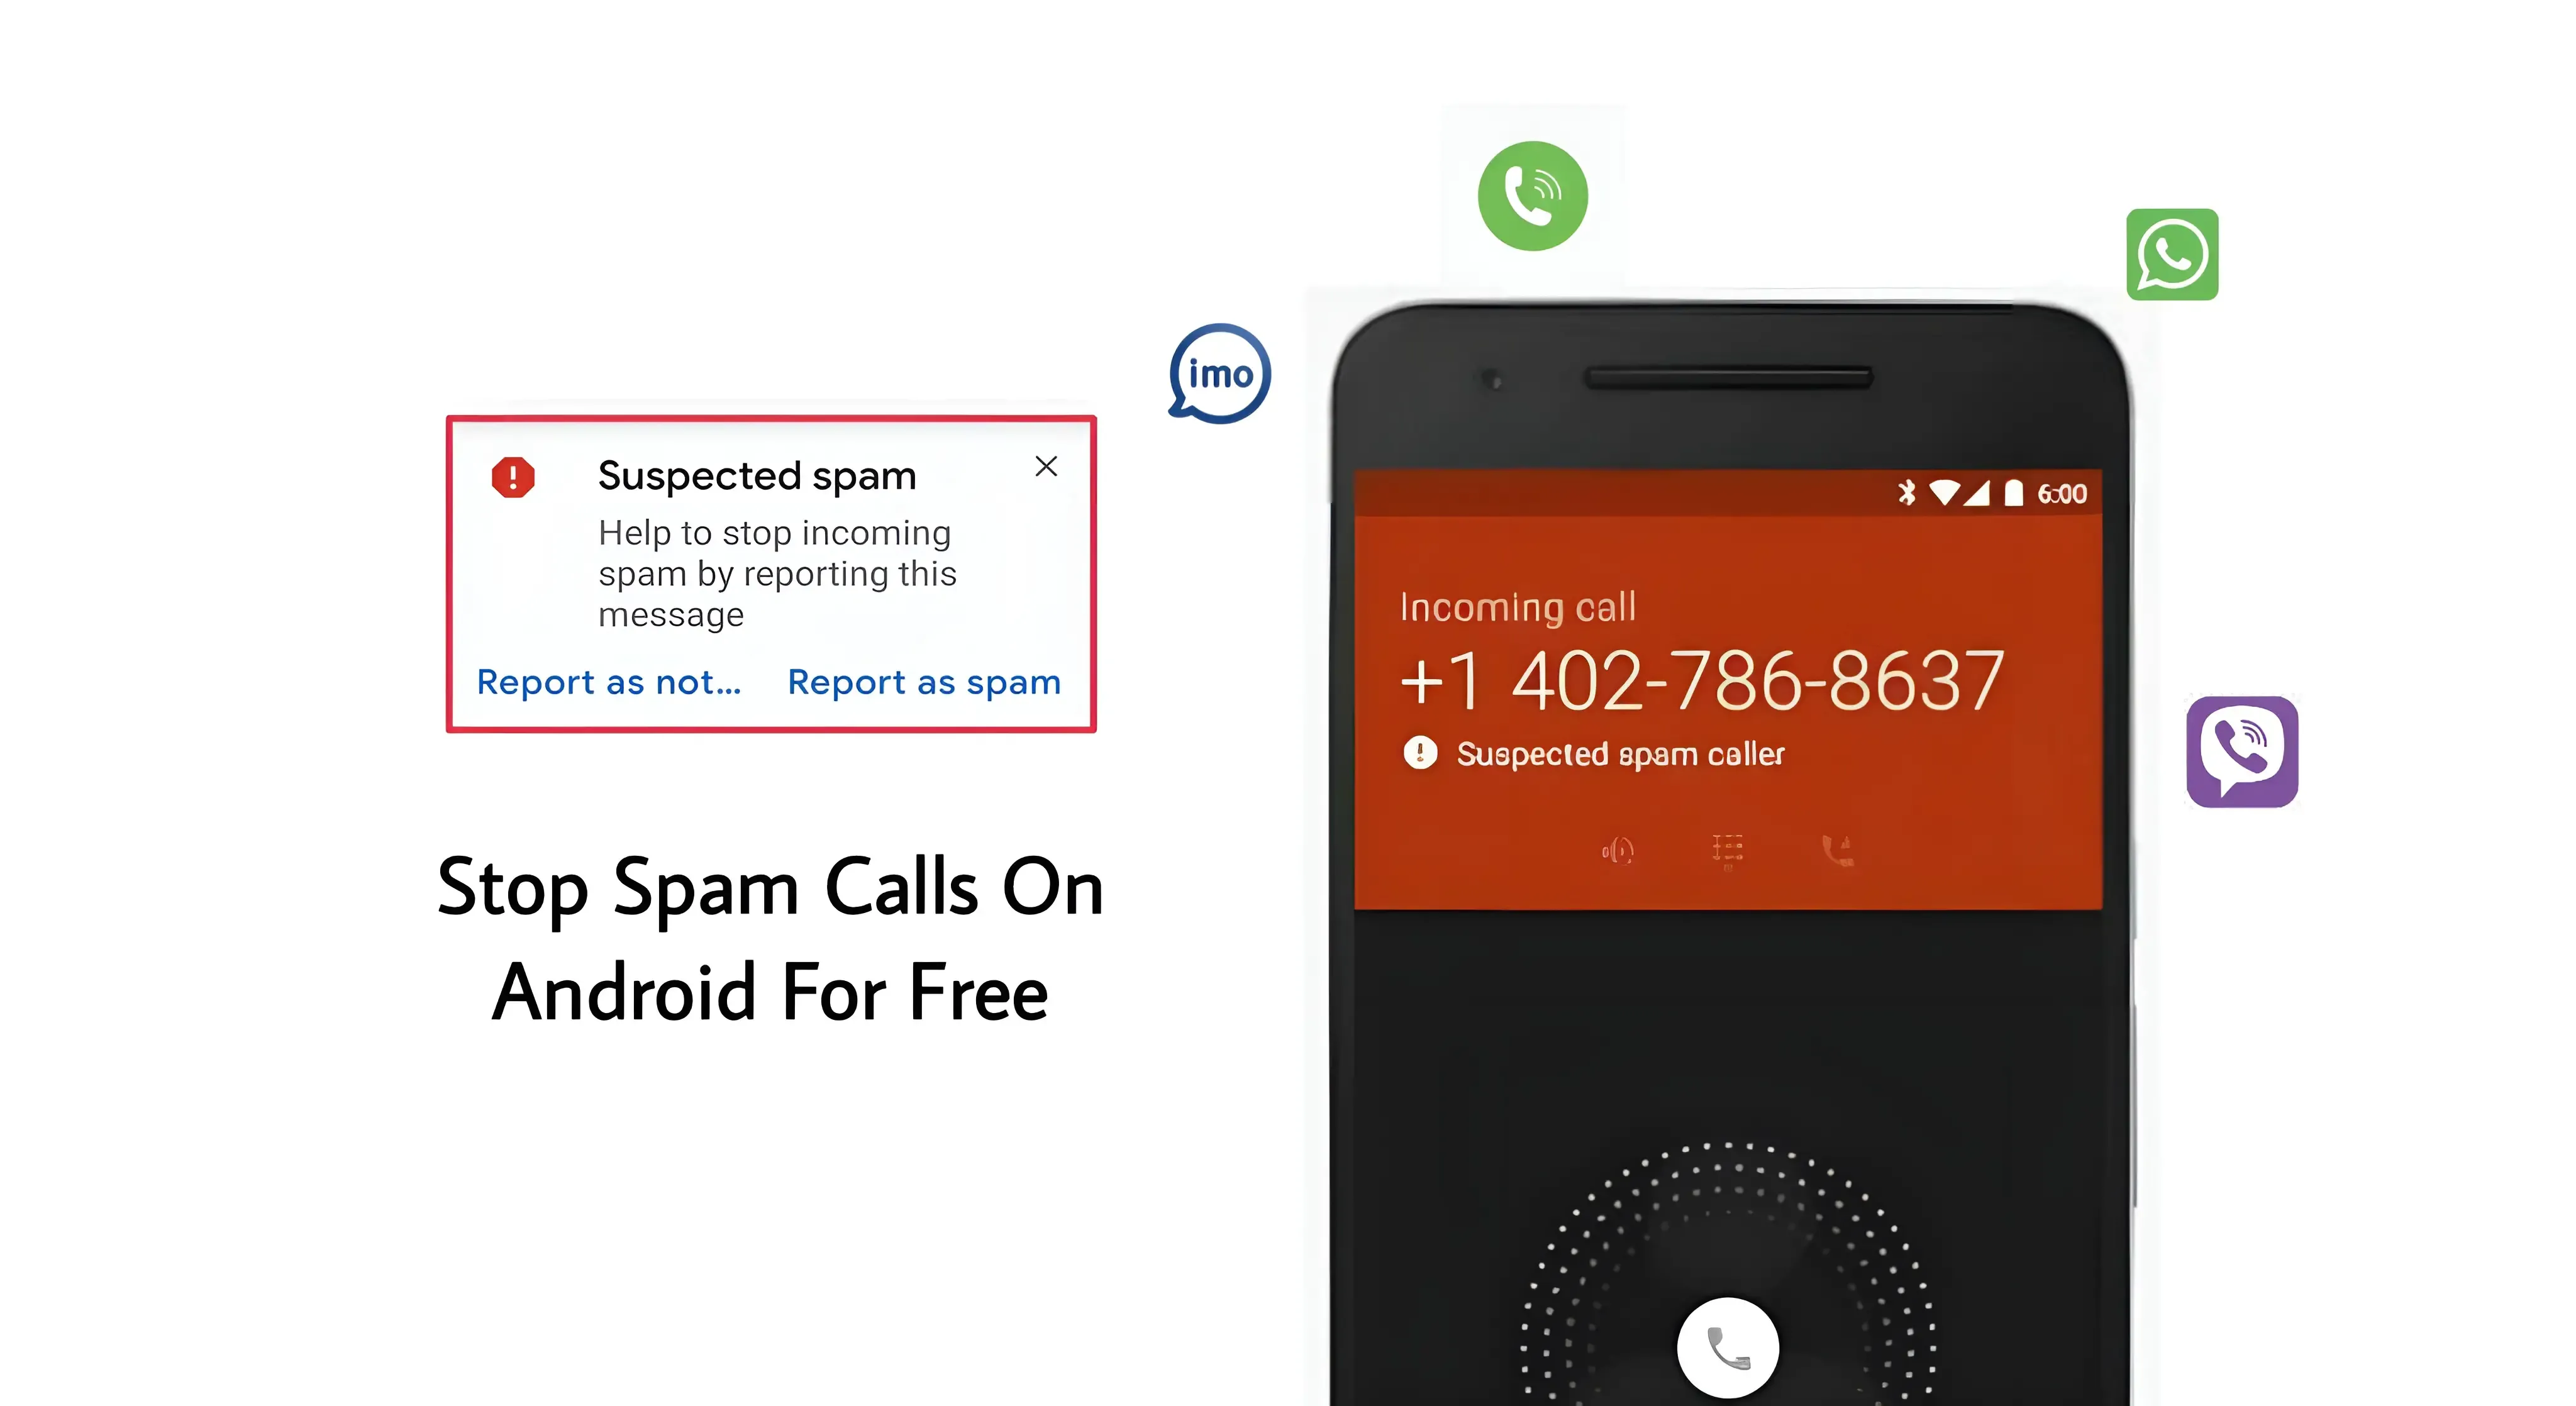 How to stop spam calls on Android for free